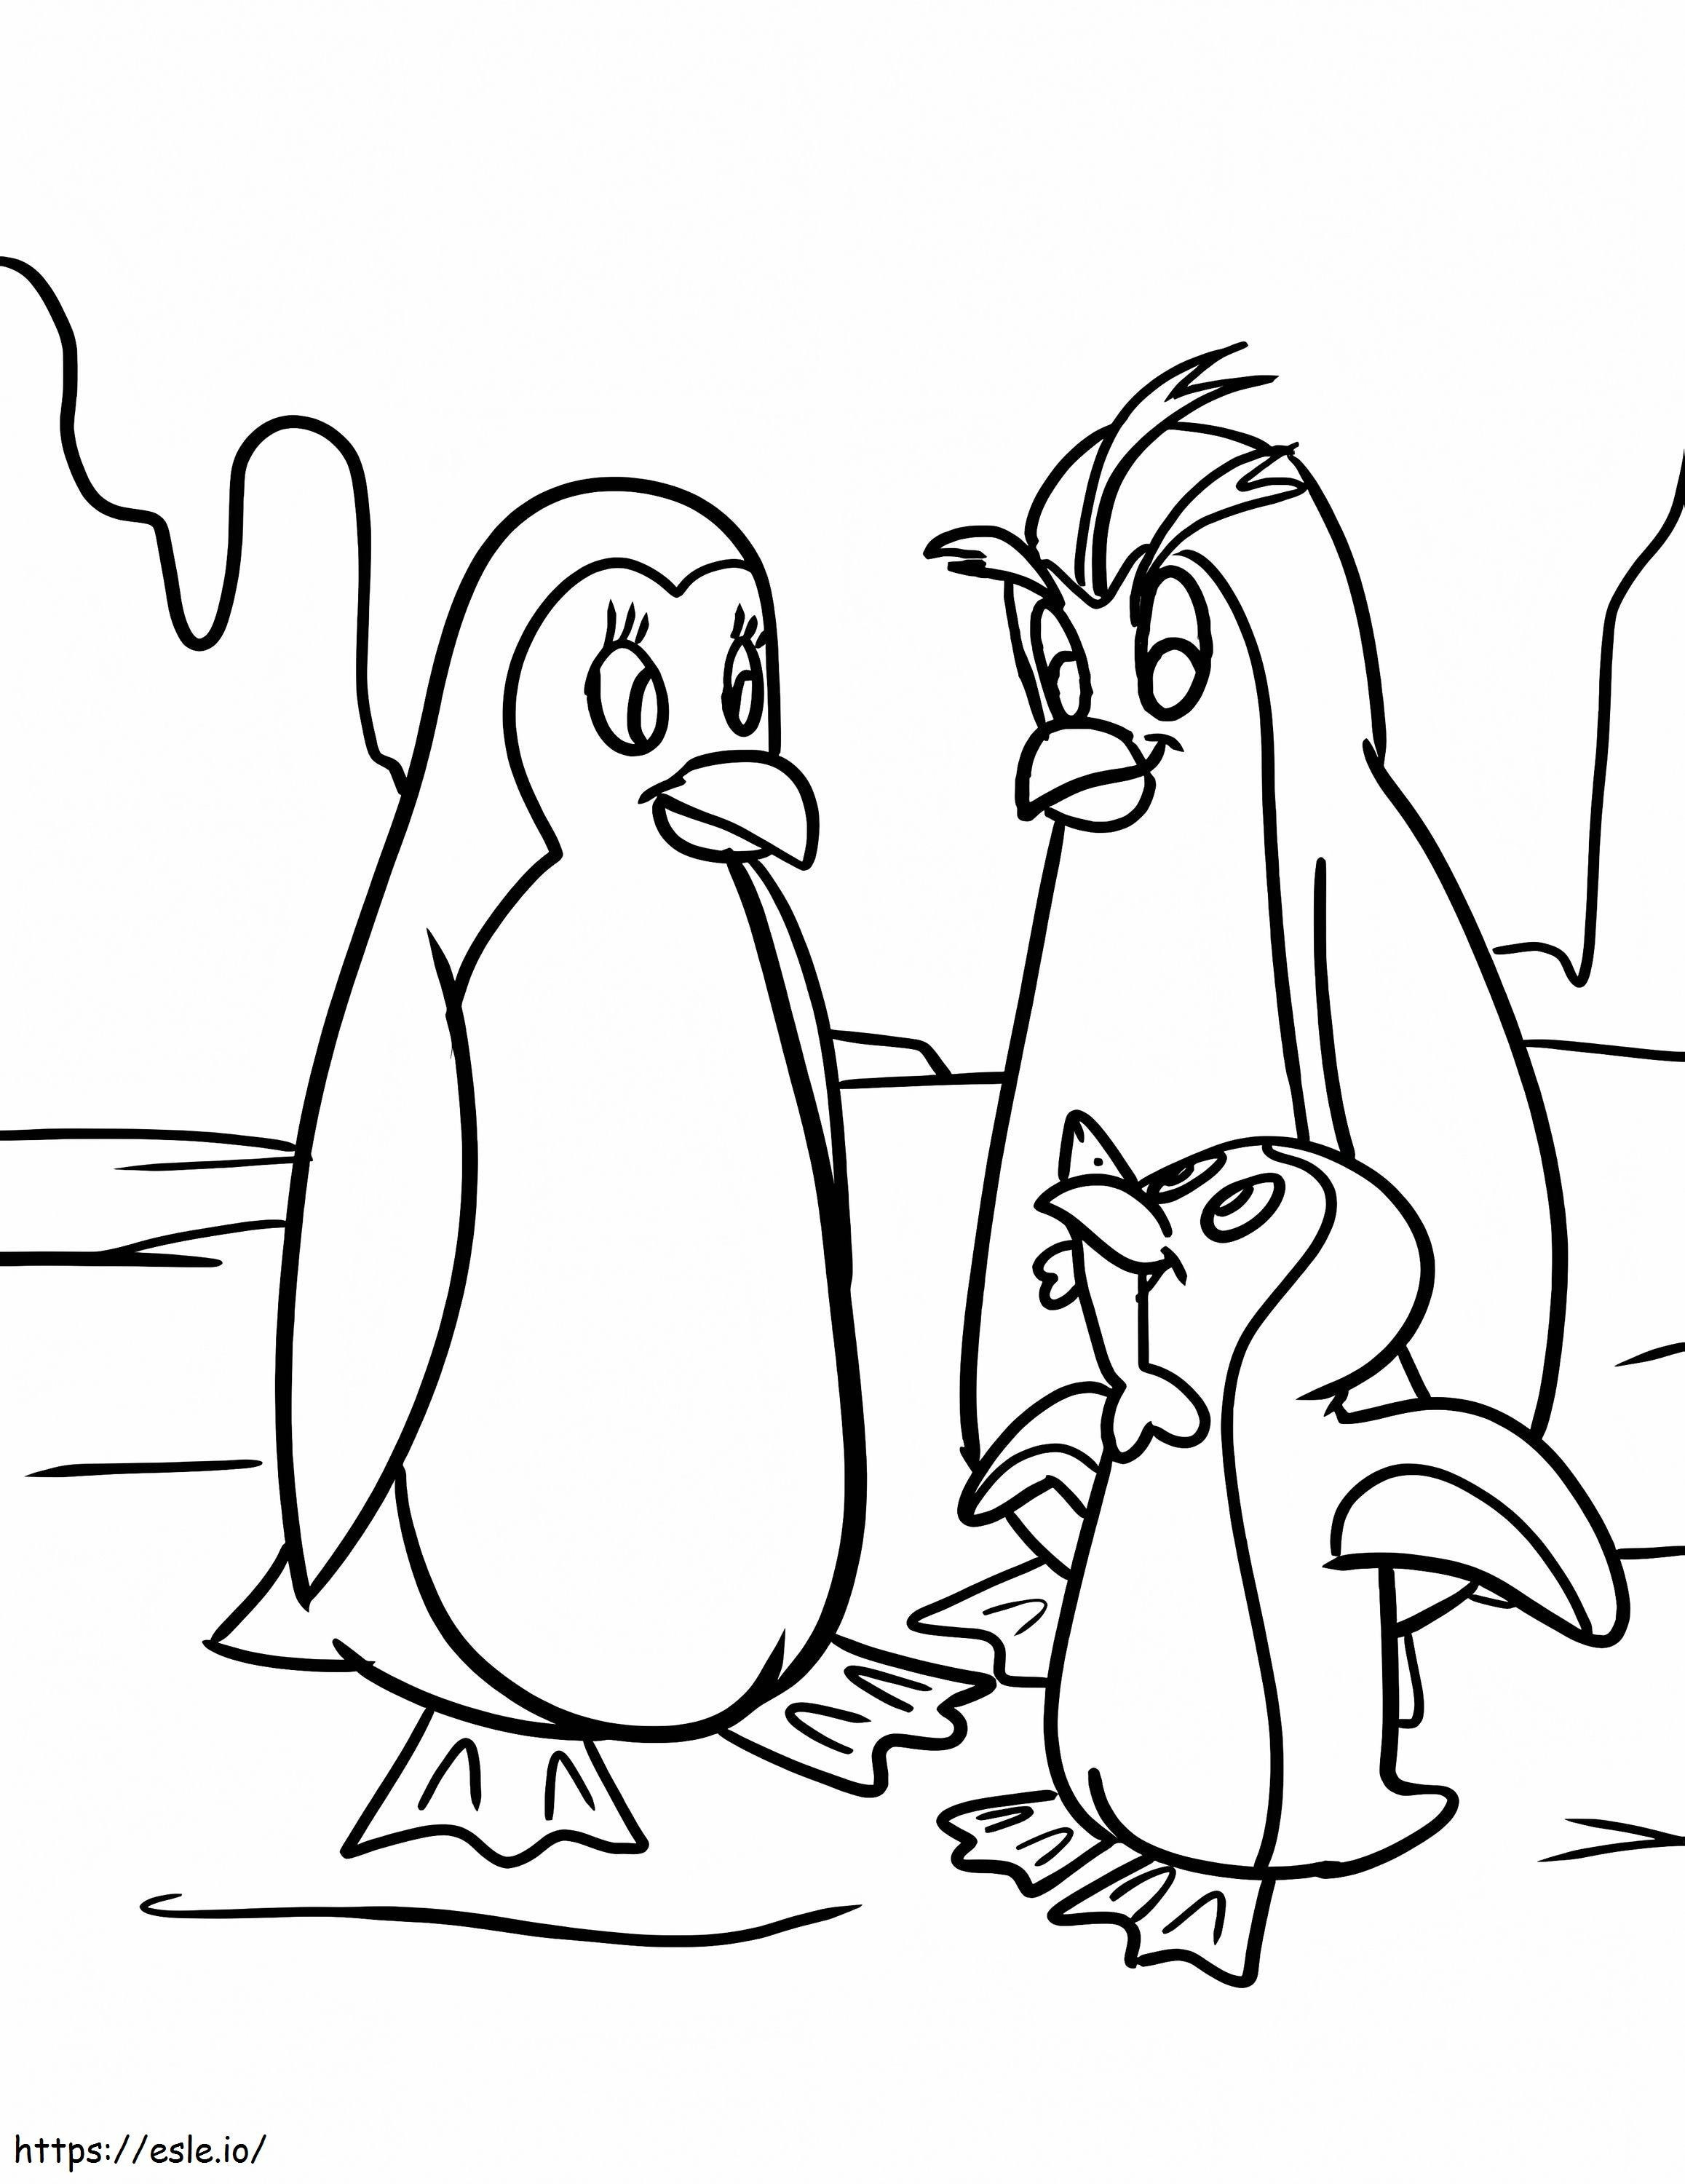 Penguin Family coloring page